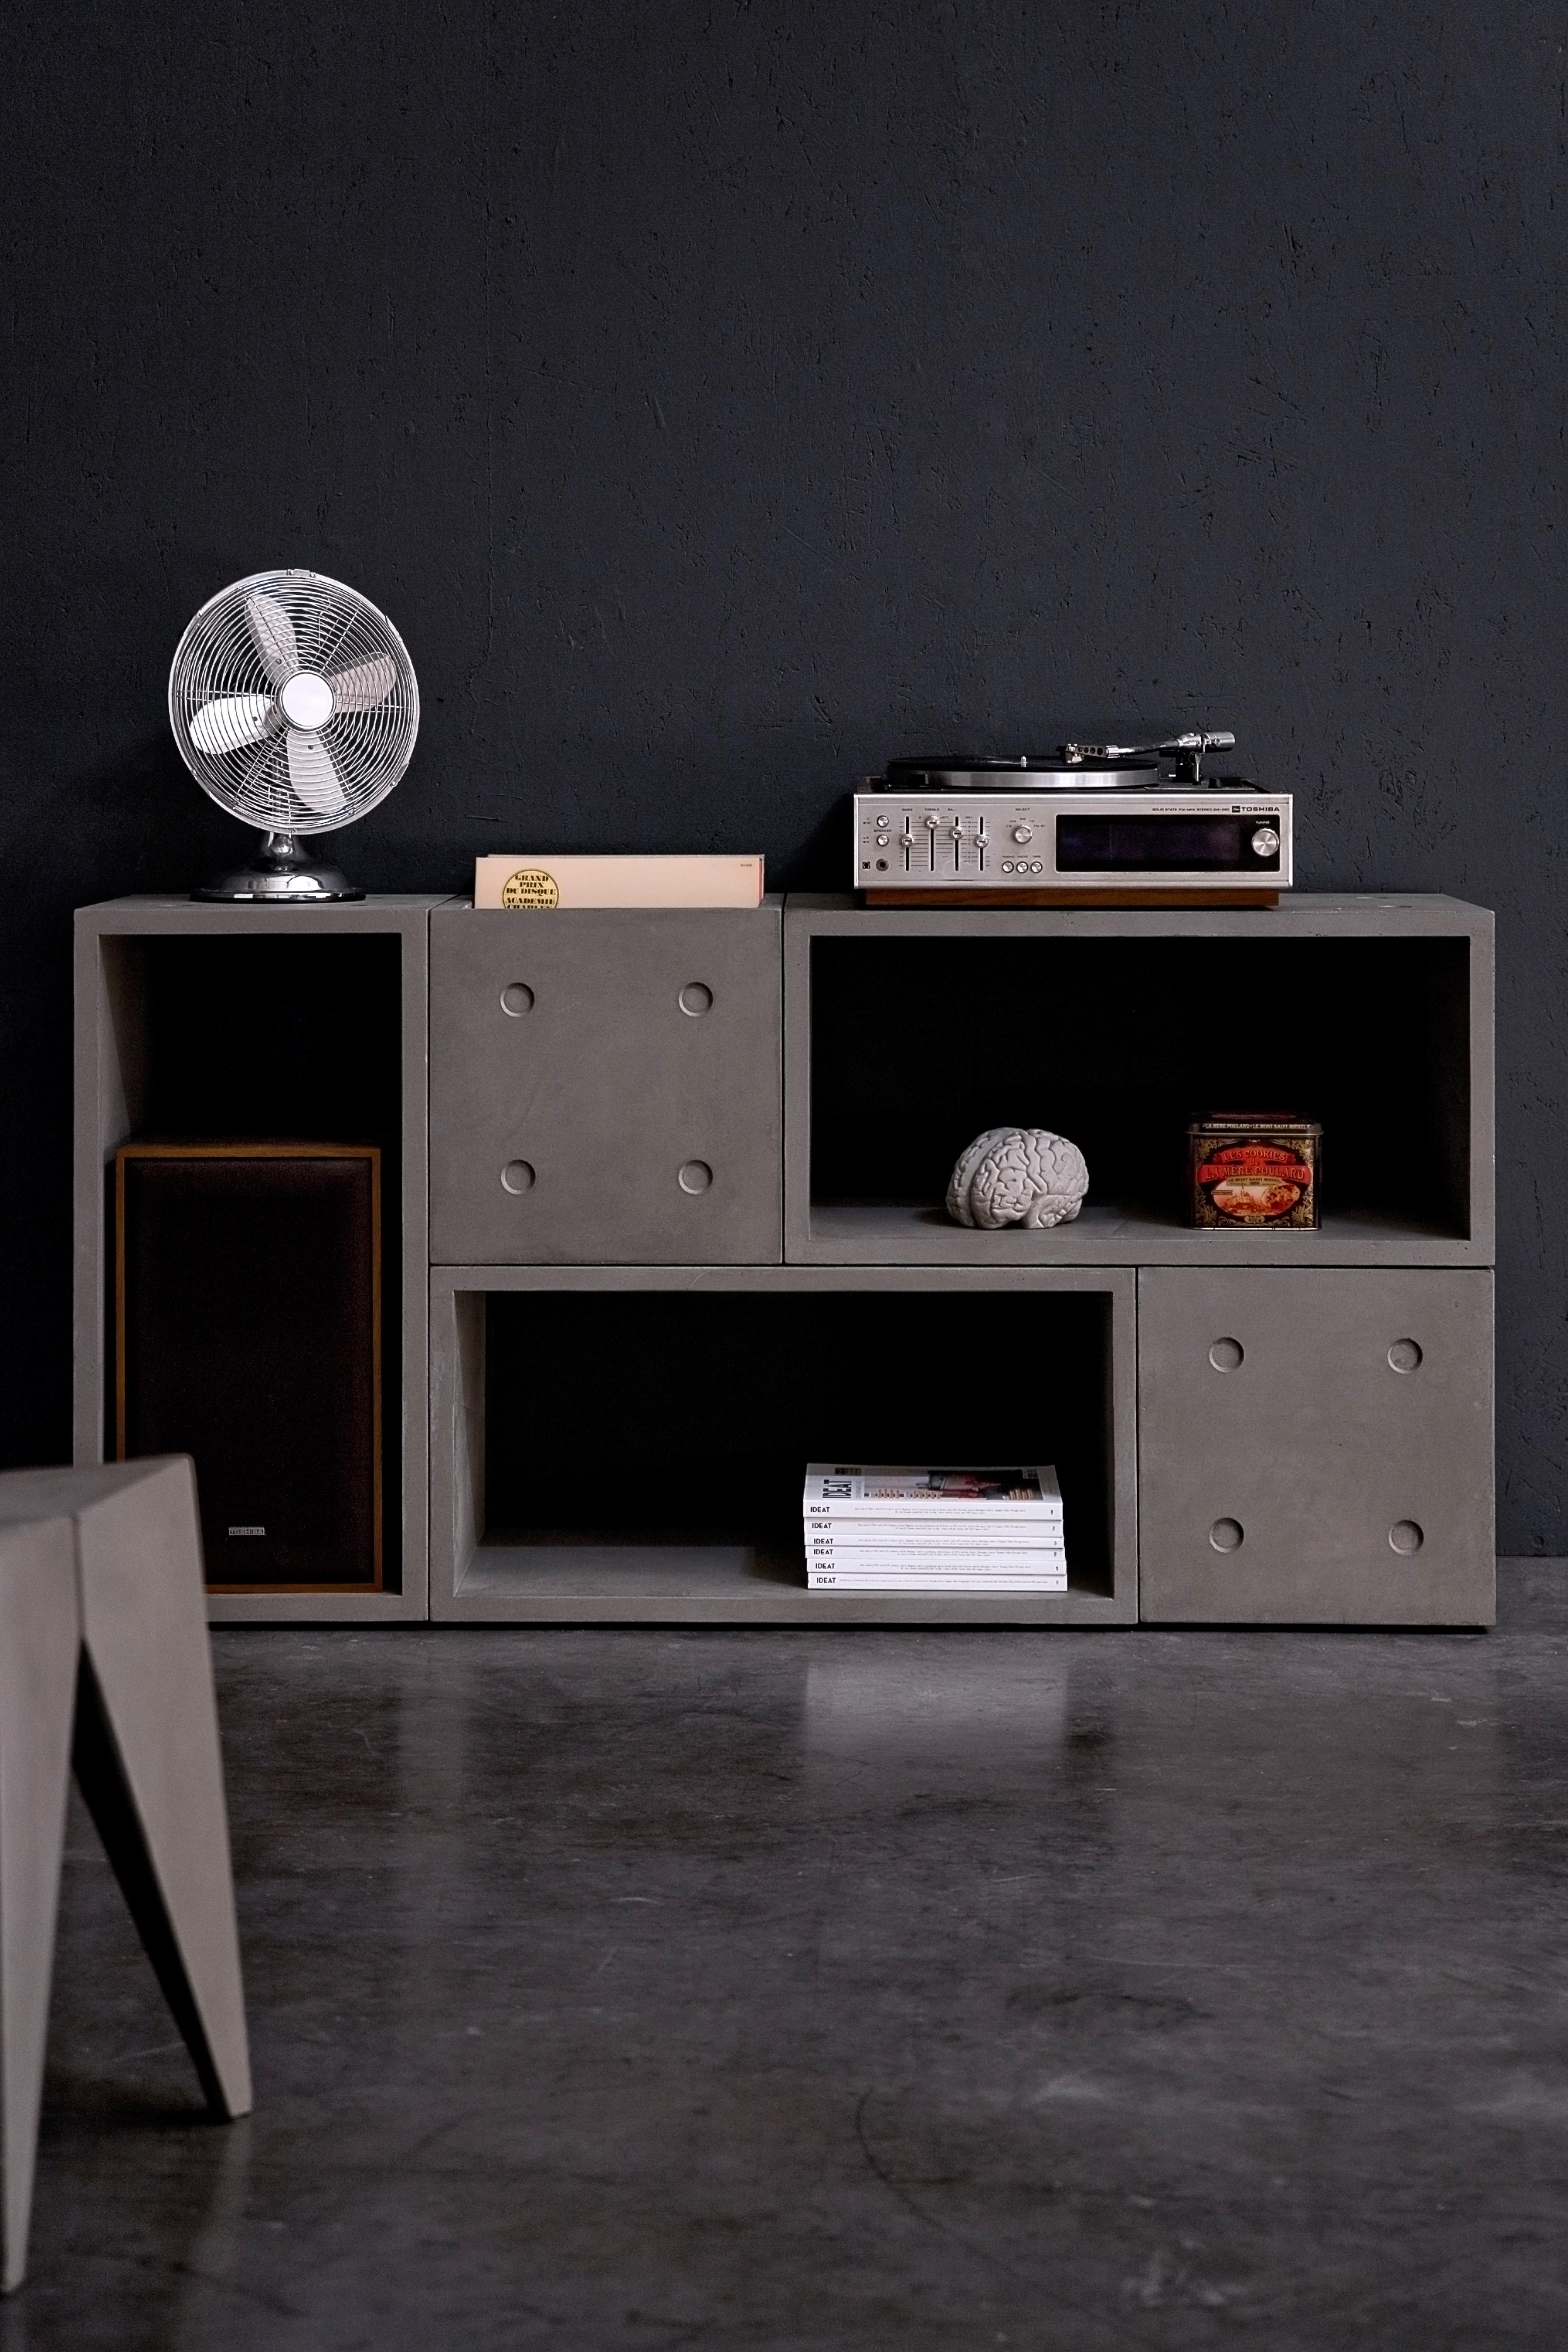 With 2 small and 3 large dice concrete cubes you can build serious furniture.
a hifi unit to place your record player and store a bunch of vynil records (about a hundred in each small cubes, 200 in the large one), a bookshelf for your kids, a